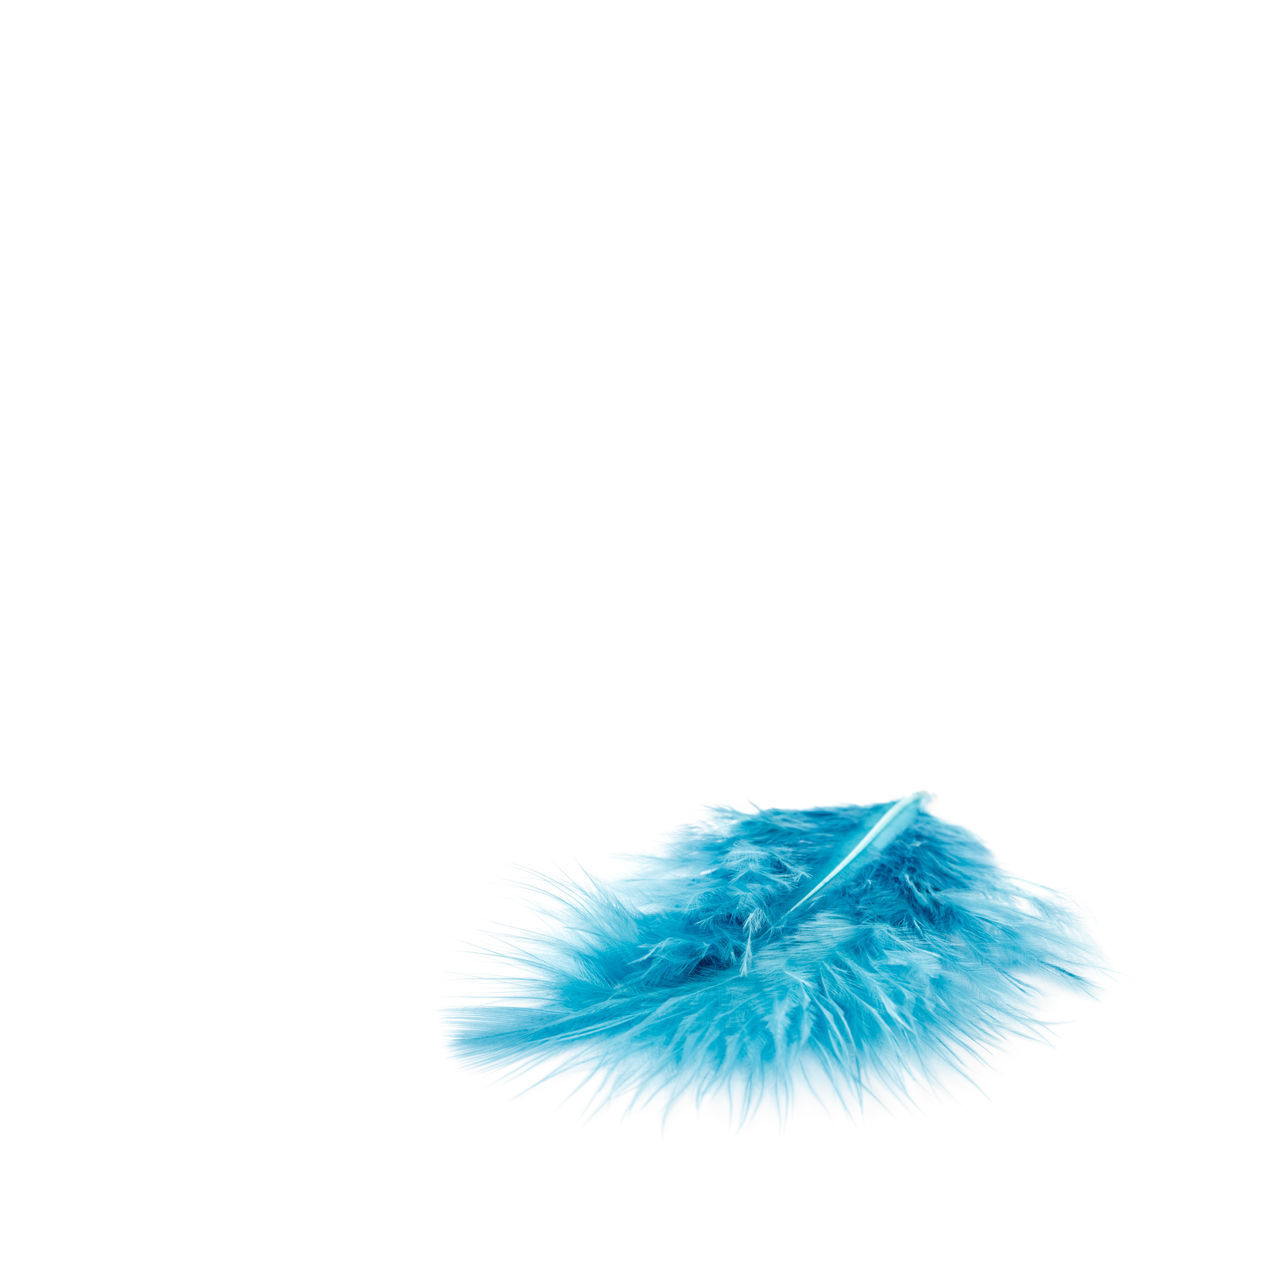 CLOSE-UP OF FEATHER ON WHITE BACKGROUND